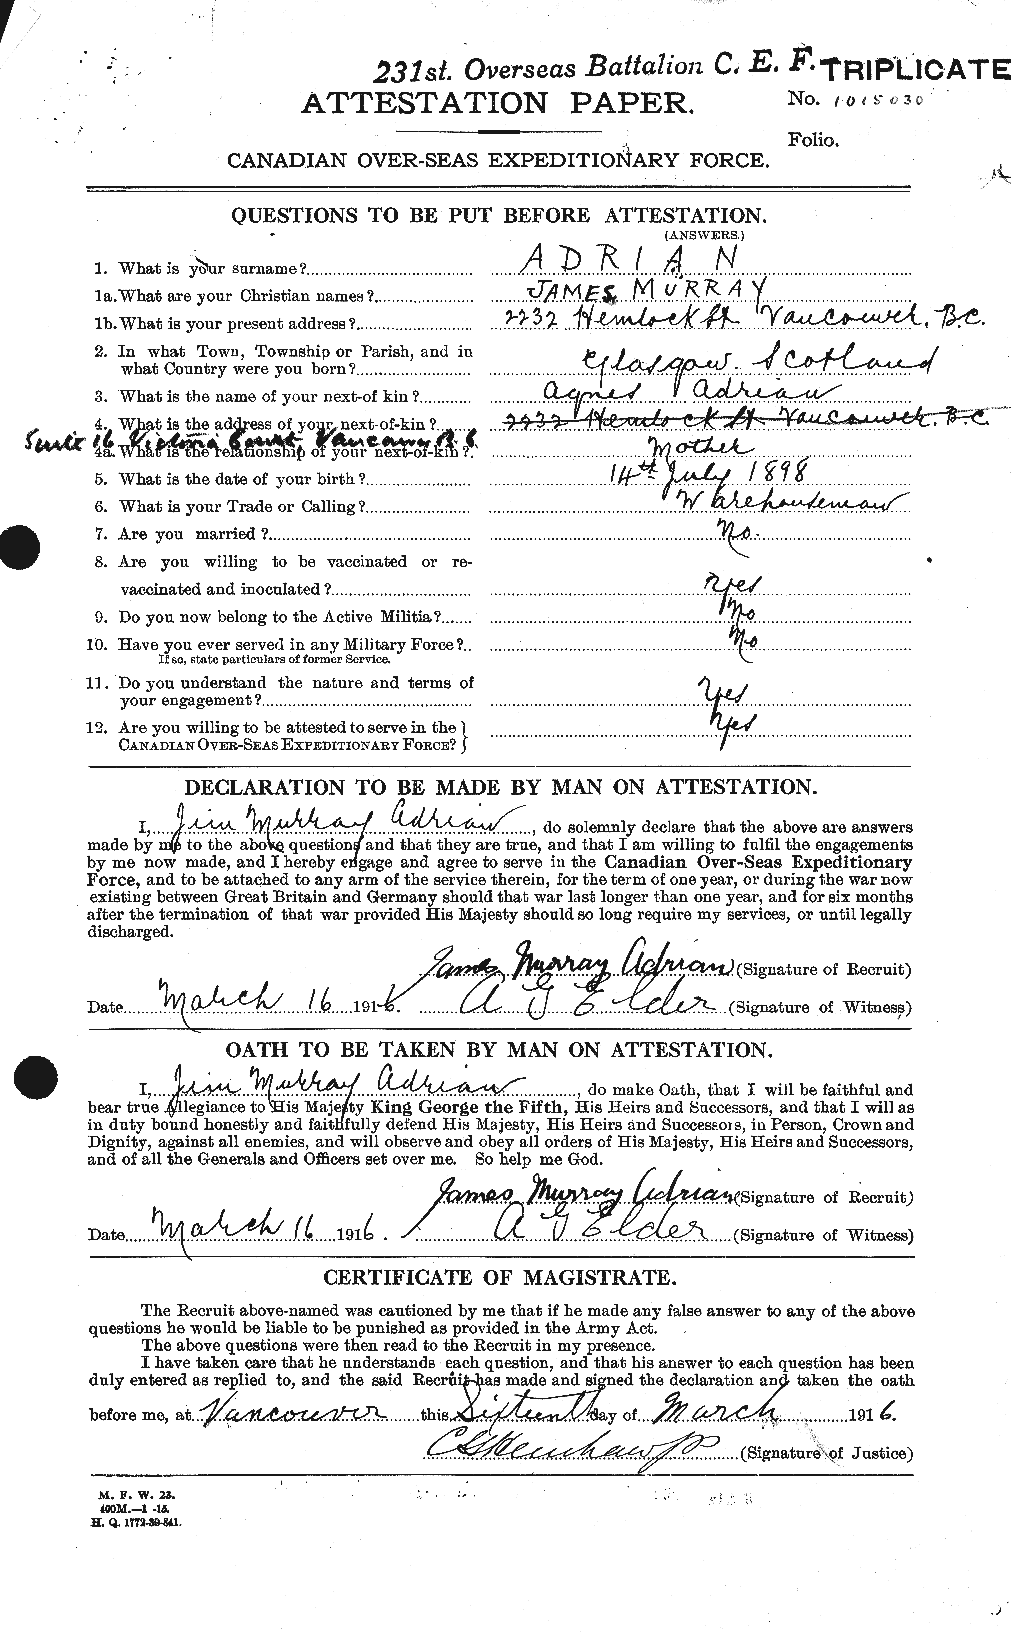 Personnel Records of the First World War - CEF 202910a